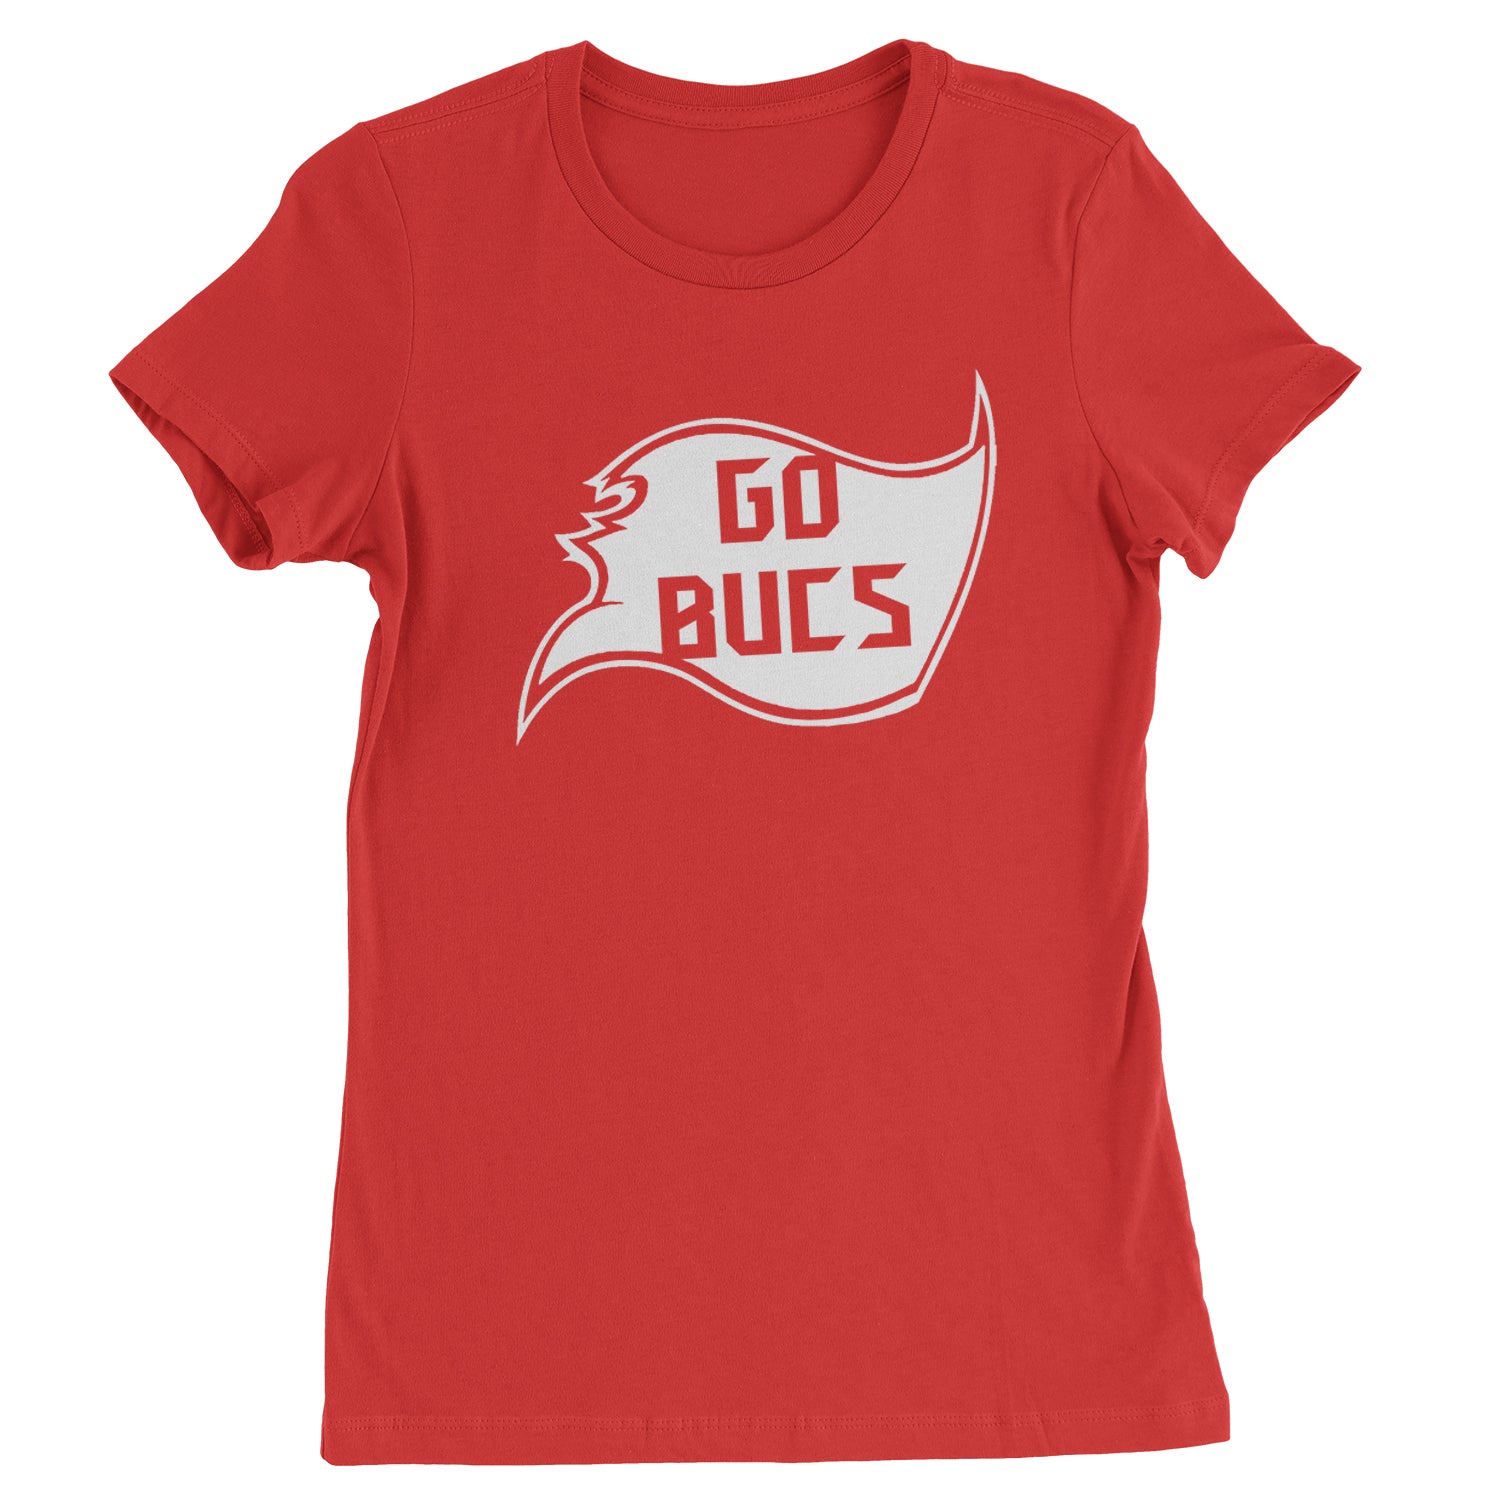 Go Bucs Buccaneers Womens T-shirt ball, flag, foot, raise, tampa, the by Expression Tees